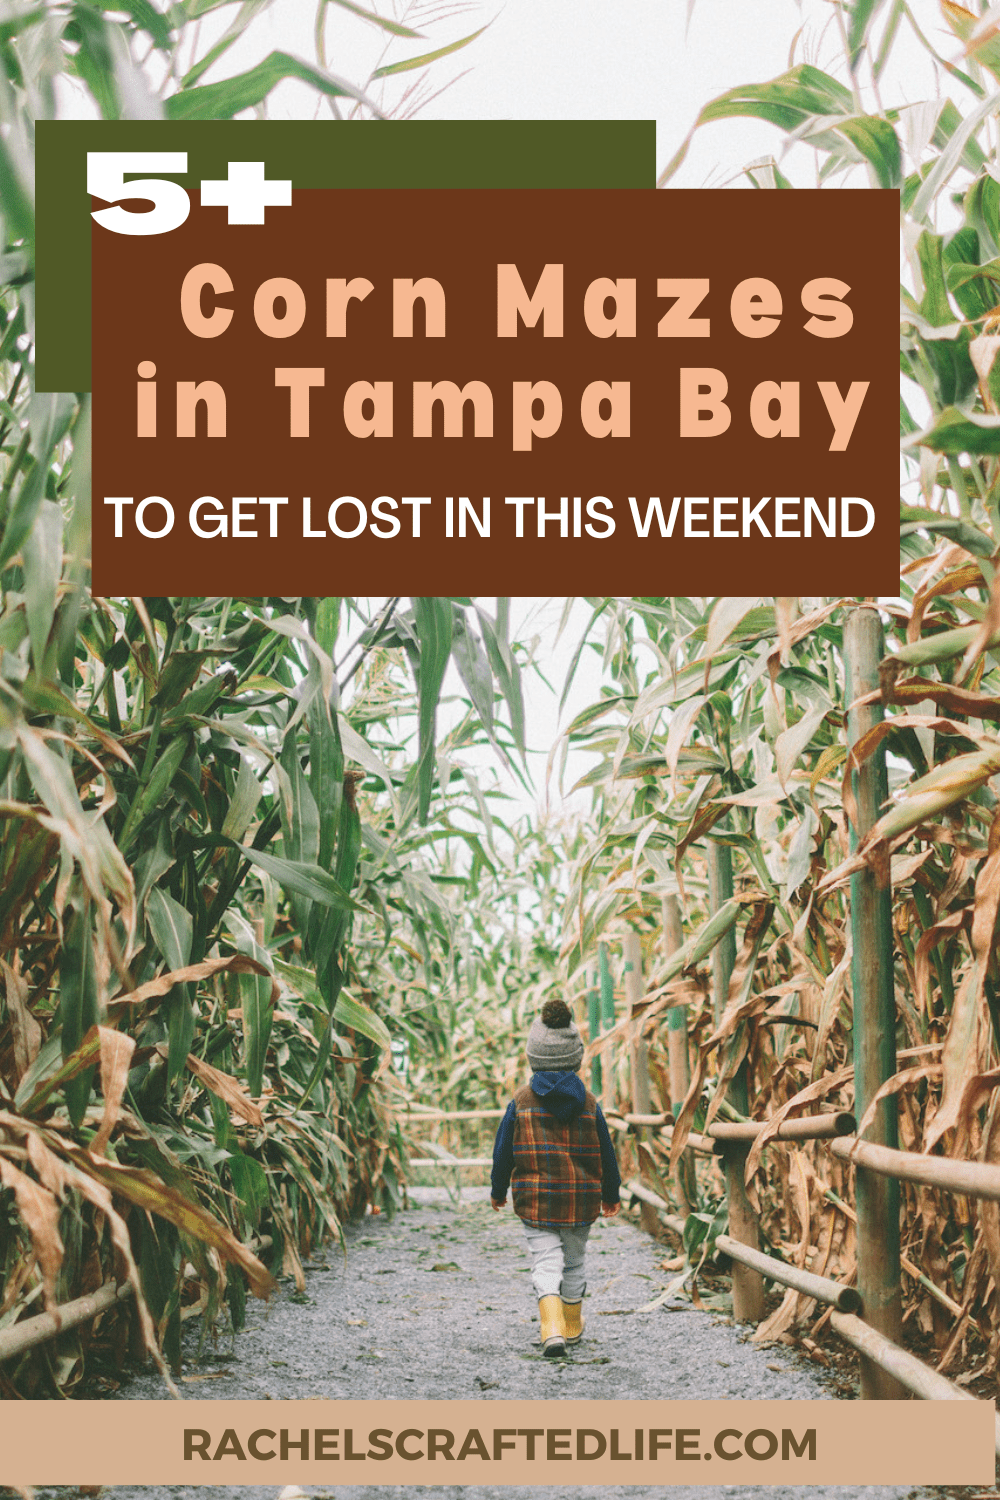 You are currently viewing 5+ Corn Mazes in Tampa Bay to Get Lost in this Weekend